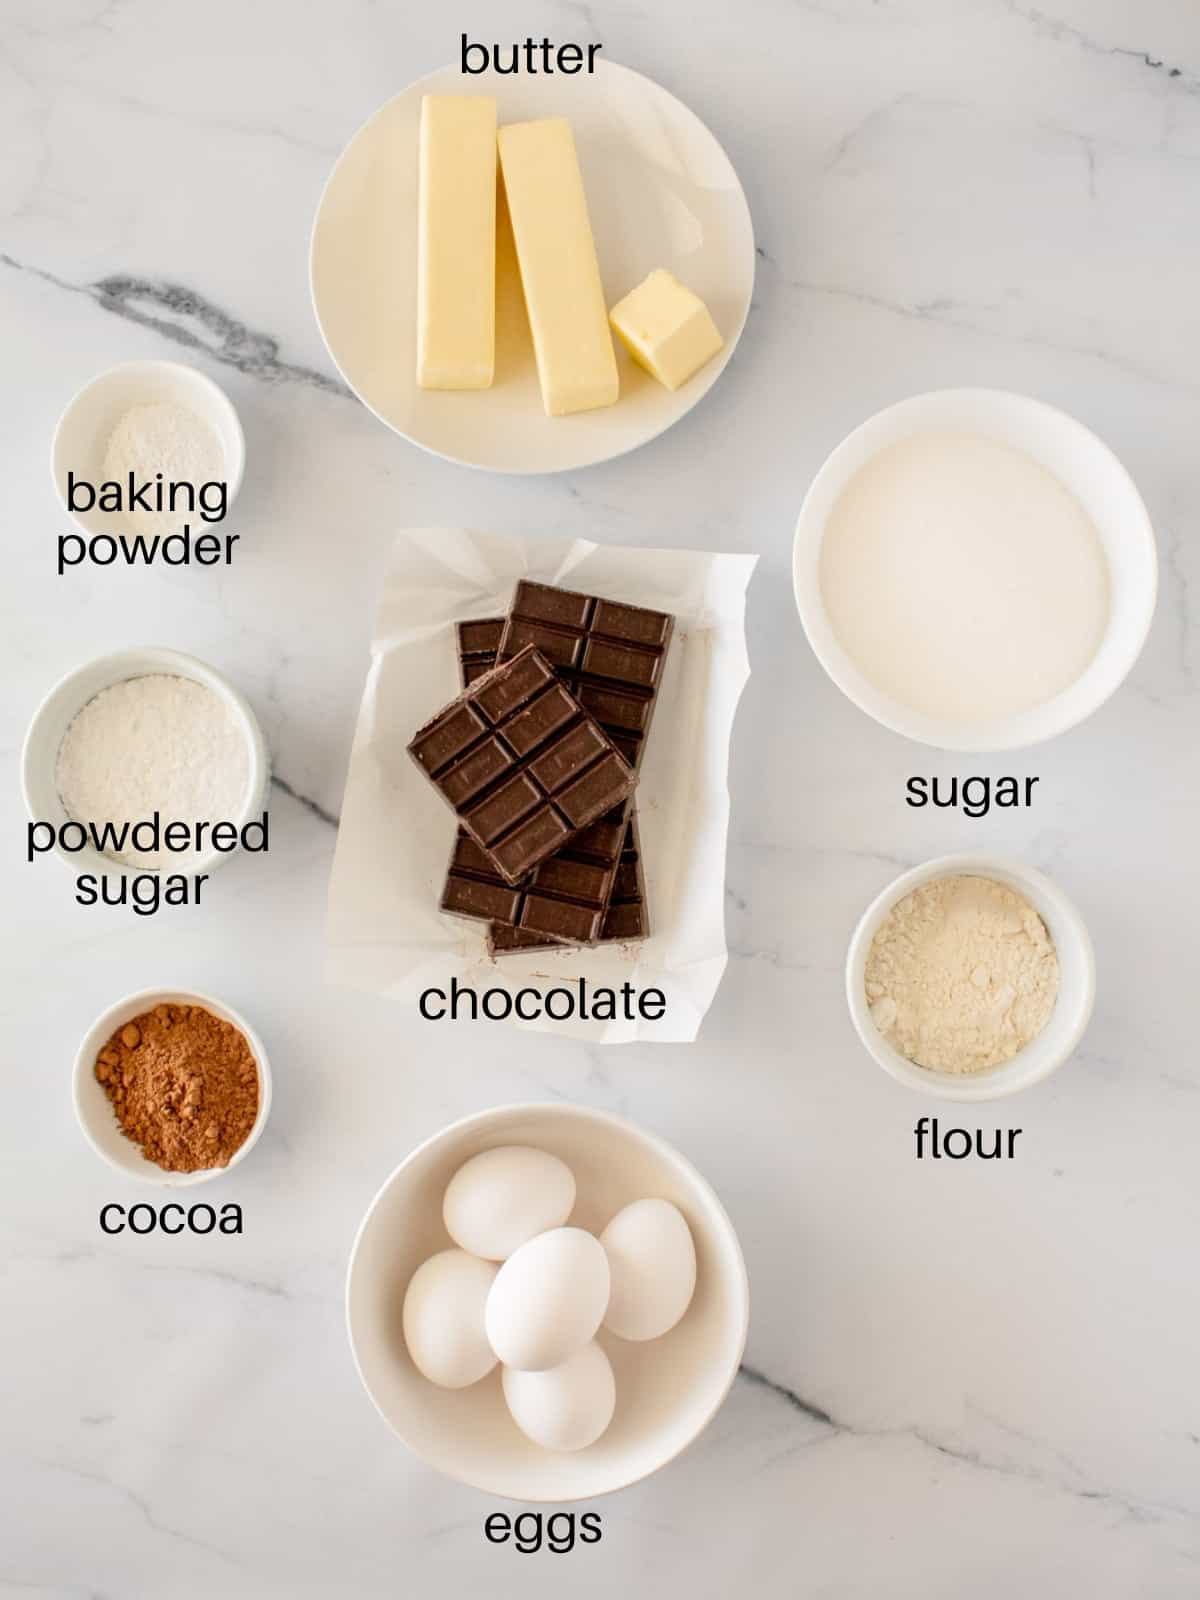 Ingredients in small bowls including butter, sugar, bar chocolate, flour, cocoa, and eggs.